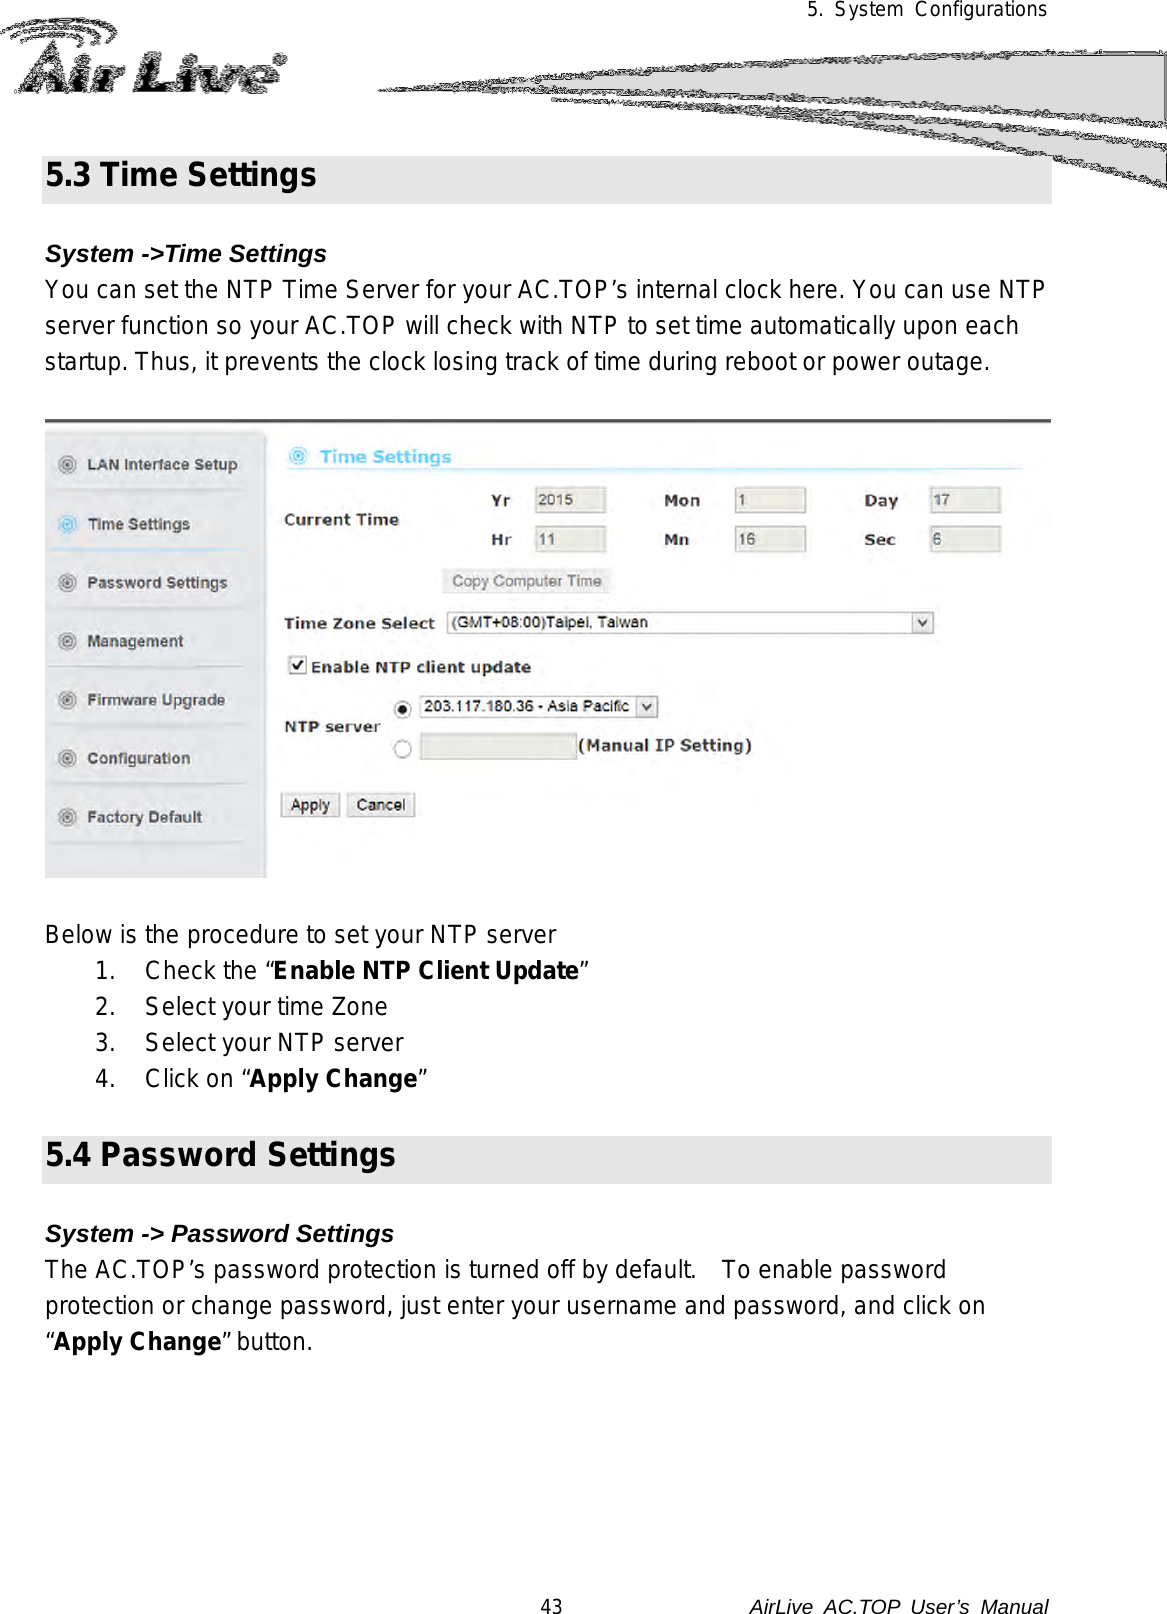 5. System Configurations  5.3 Time Settings  System -&gt;Time Settings You can set the NTP Time Server for your AC.TOP’s internal clock here. You can use NTP server function so your AC.TOP will check with NTP to set time automatically upon each startup. Thus, it prevents the clock losing track of time during reboot or power outage.     Below is the procedure to set your NTP server 1. Check the “Enable NTP Client Update” 2. Select your time Zone 3. Select your NTP server 4. Click on “Apply Change”  5.4 Password Settings  System -&gt; Password Settings The AC.TOP’s password protection is turned off by default.   To enable password protection or change password, just enter your username and password, and click on “Apply Change” button.   43               AirLive  AC.TOP User’s Manual 